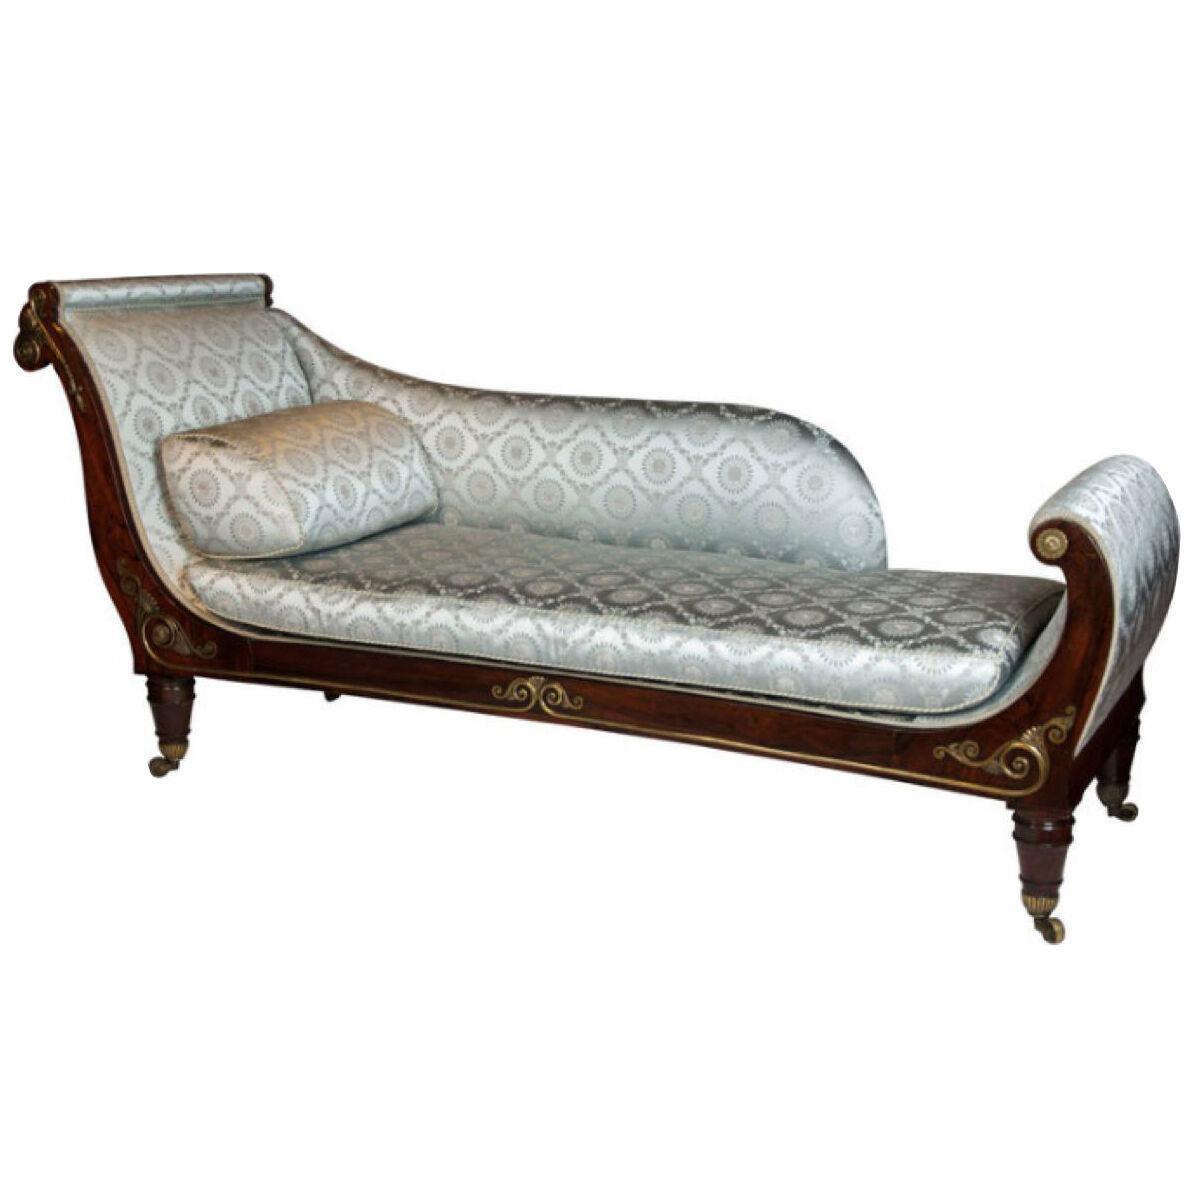 19th Century High-Style Regency Period Library Couch or Chaise Longue